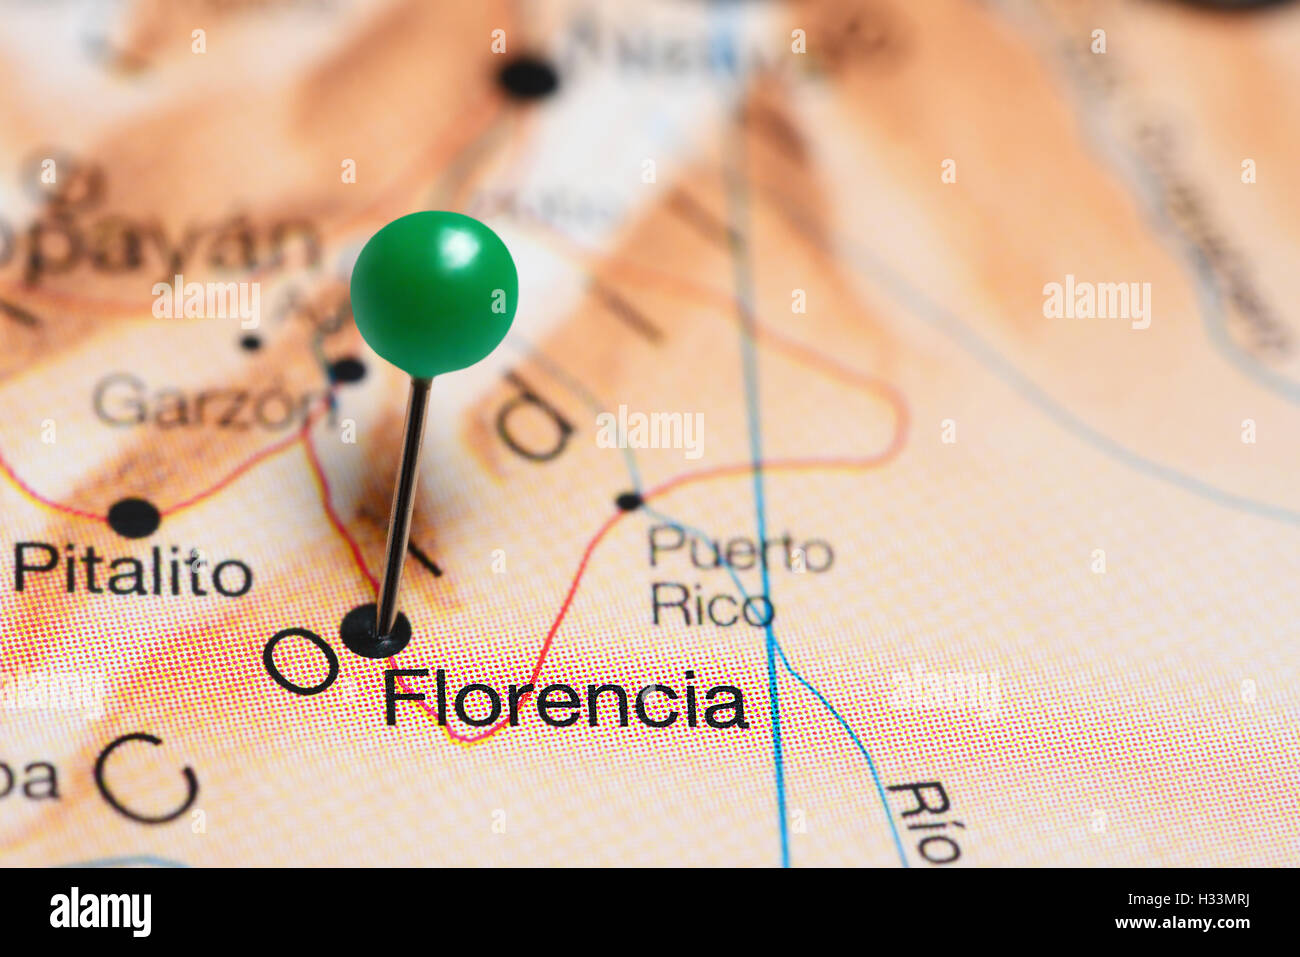 Florencia pinned on a map of Colombia Stock Photo